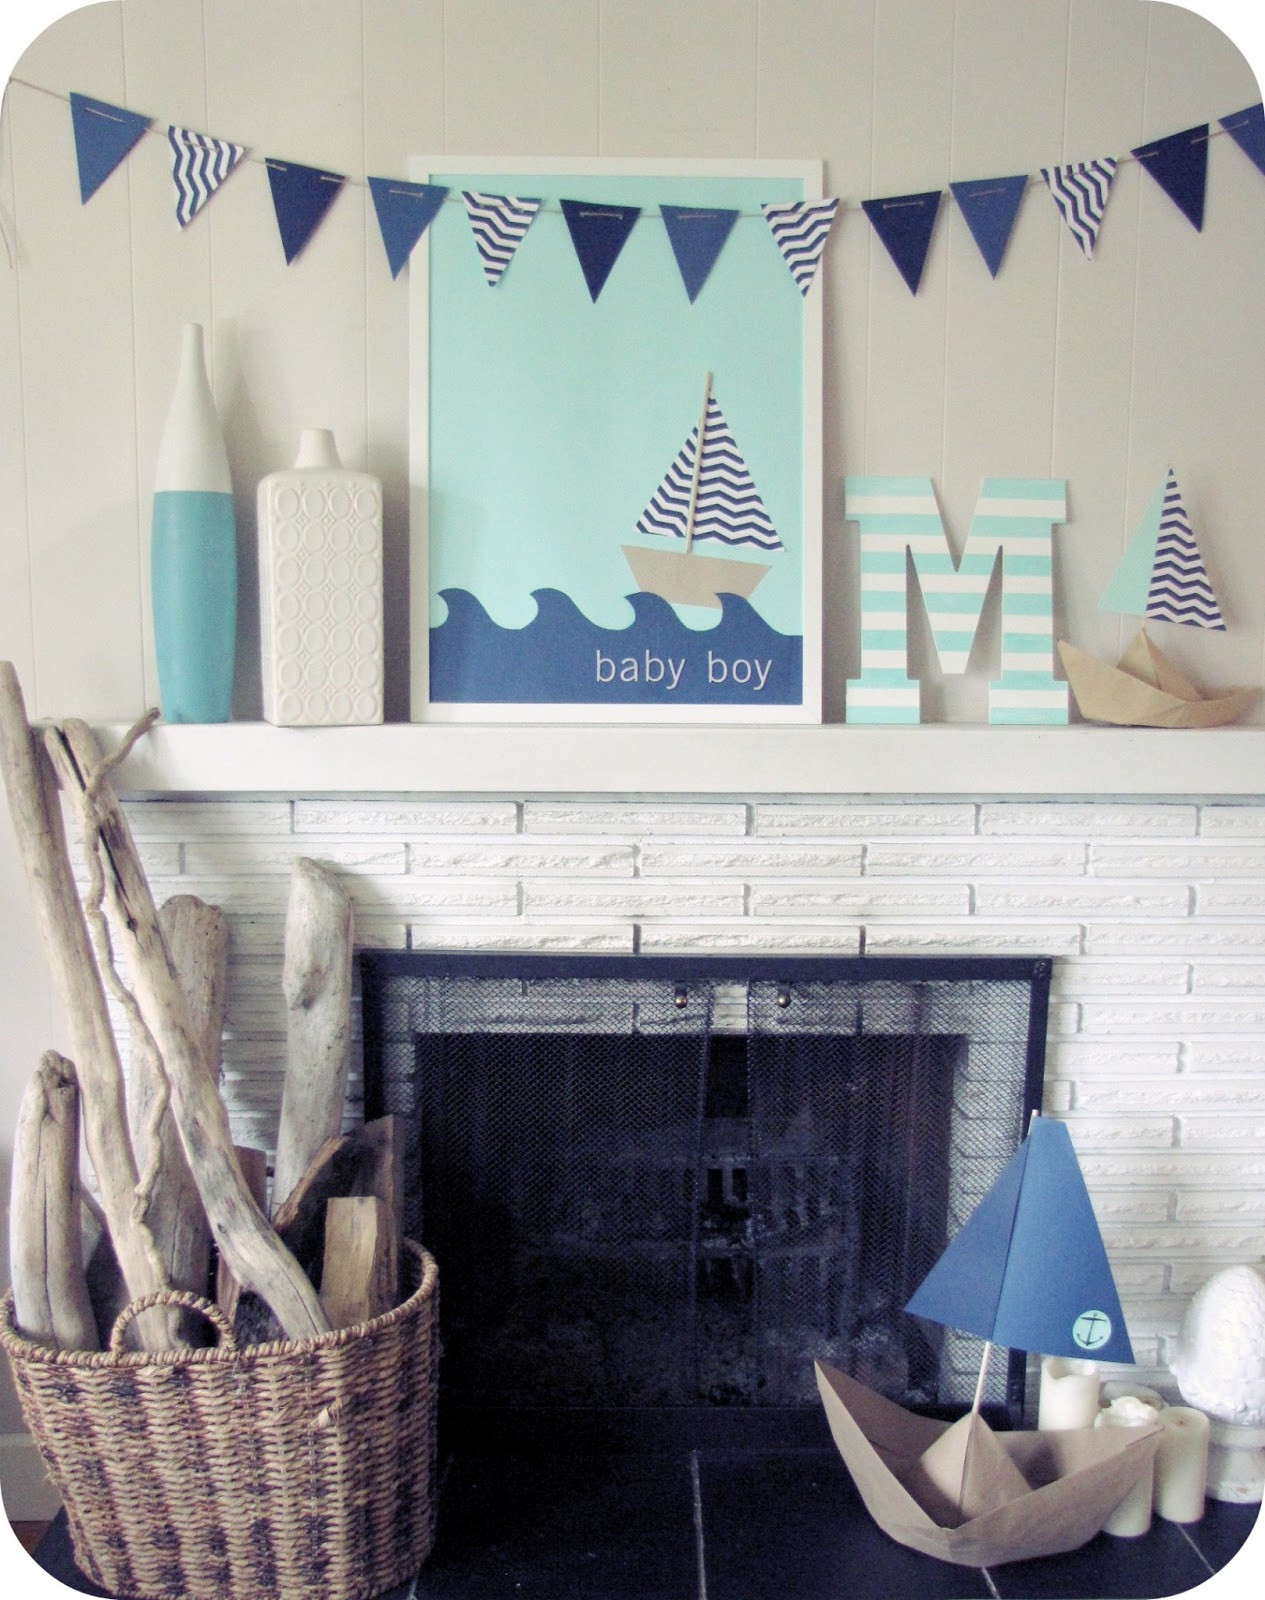 Nautical Baby Boy Decor
 My House of Giggles A Nautical Baby Boy Shower for Malcolm